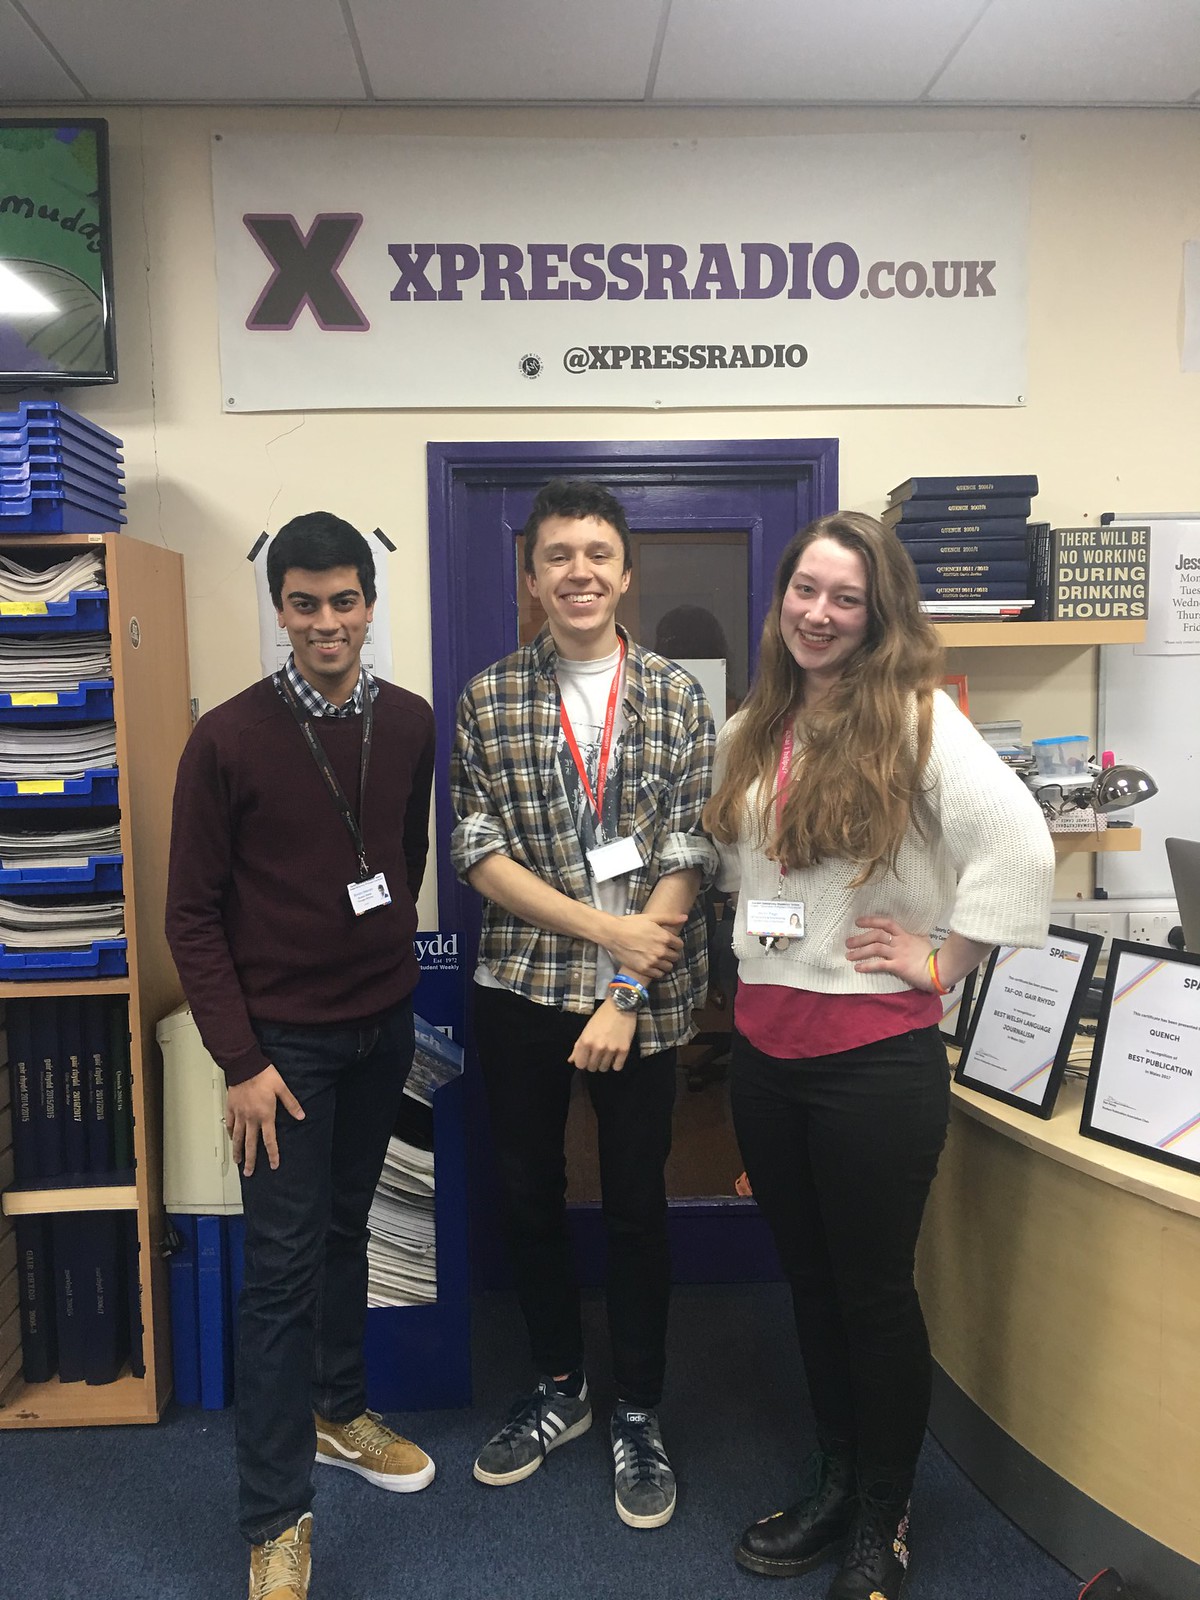 Xpress Spring Elections coverage has officially started!